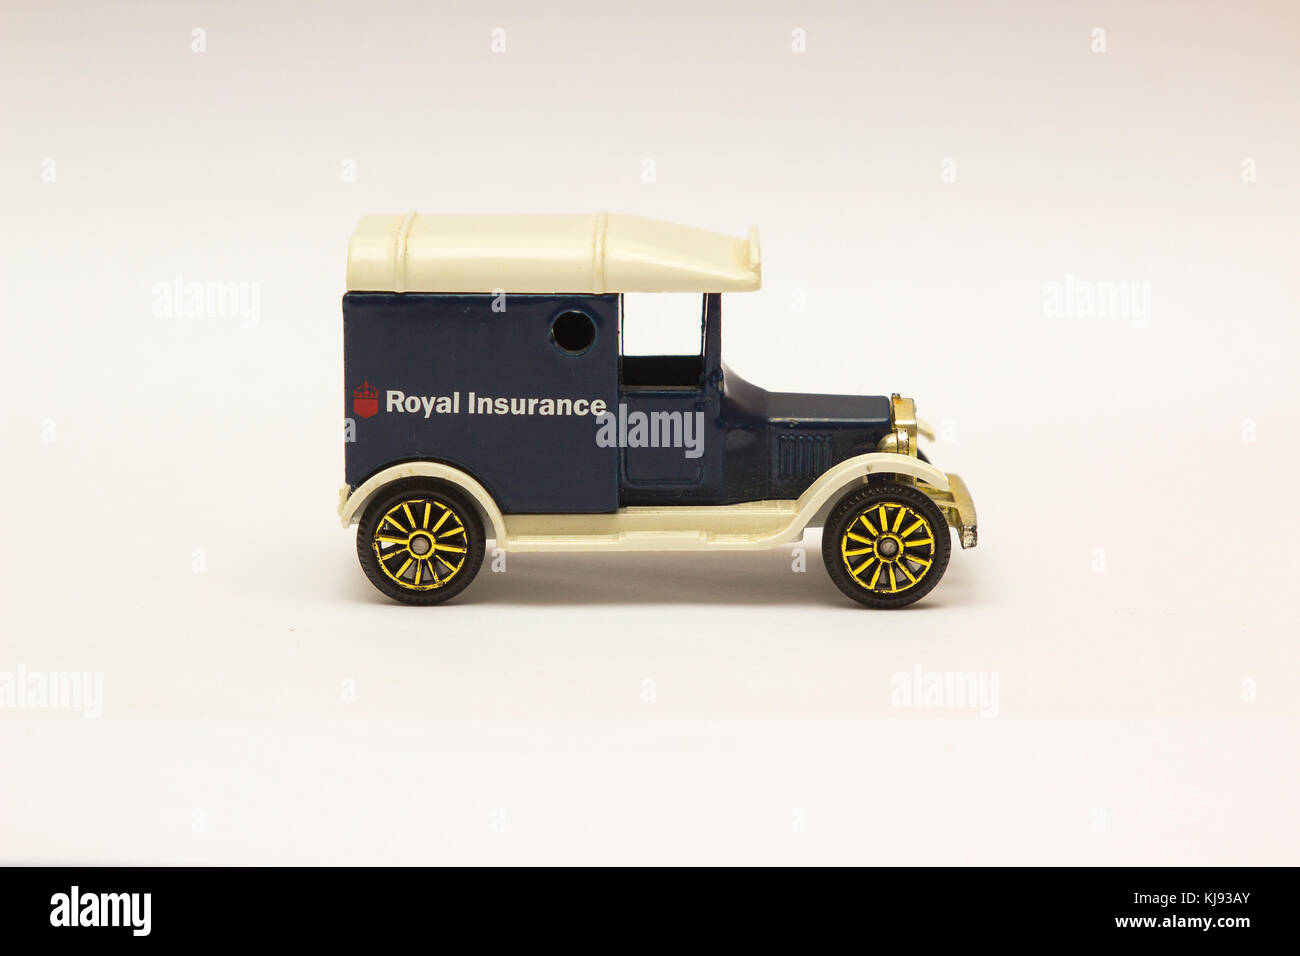 A die cast model of an old Ford Van in the livery of the old Royal Insurance of the United Kingdom Stock Photo